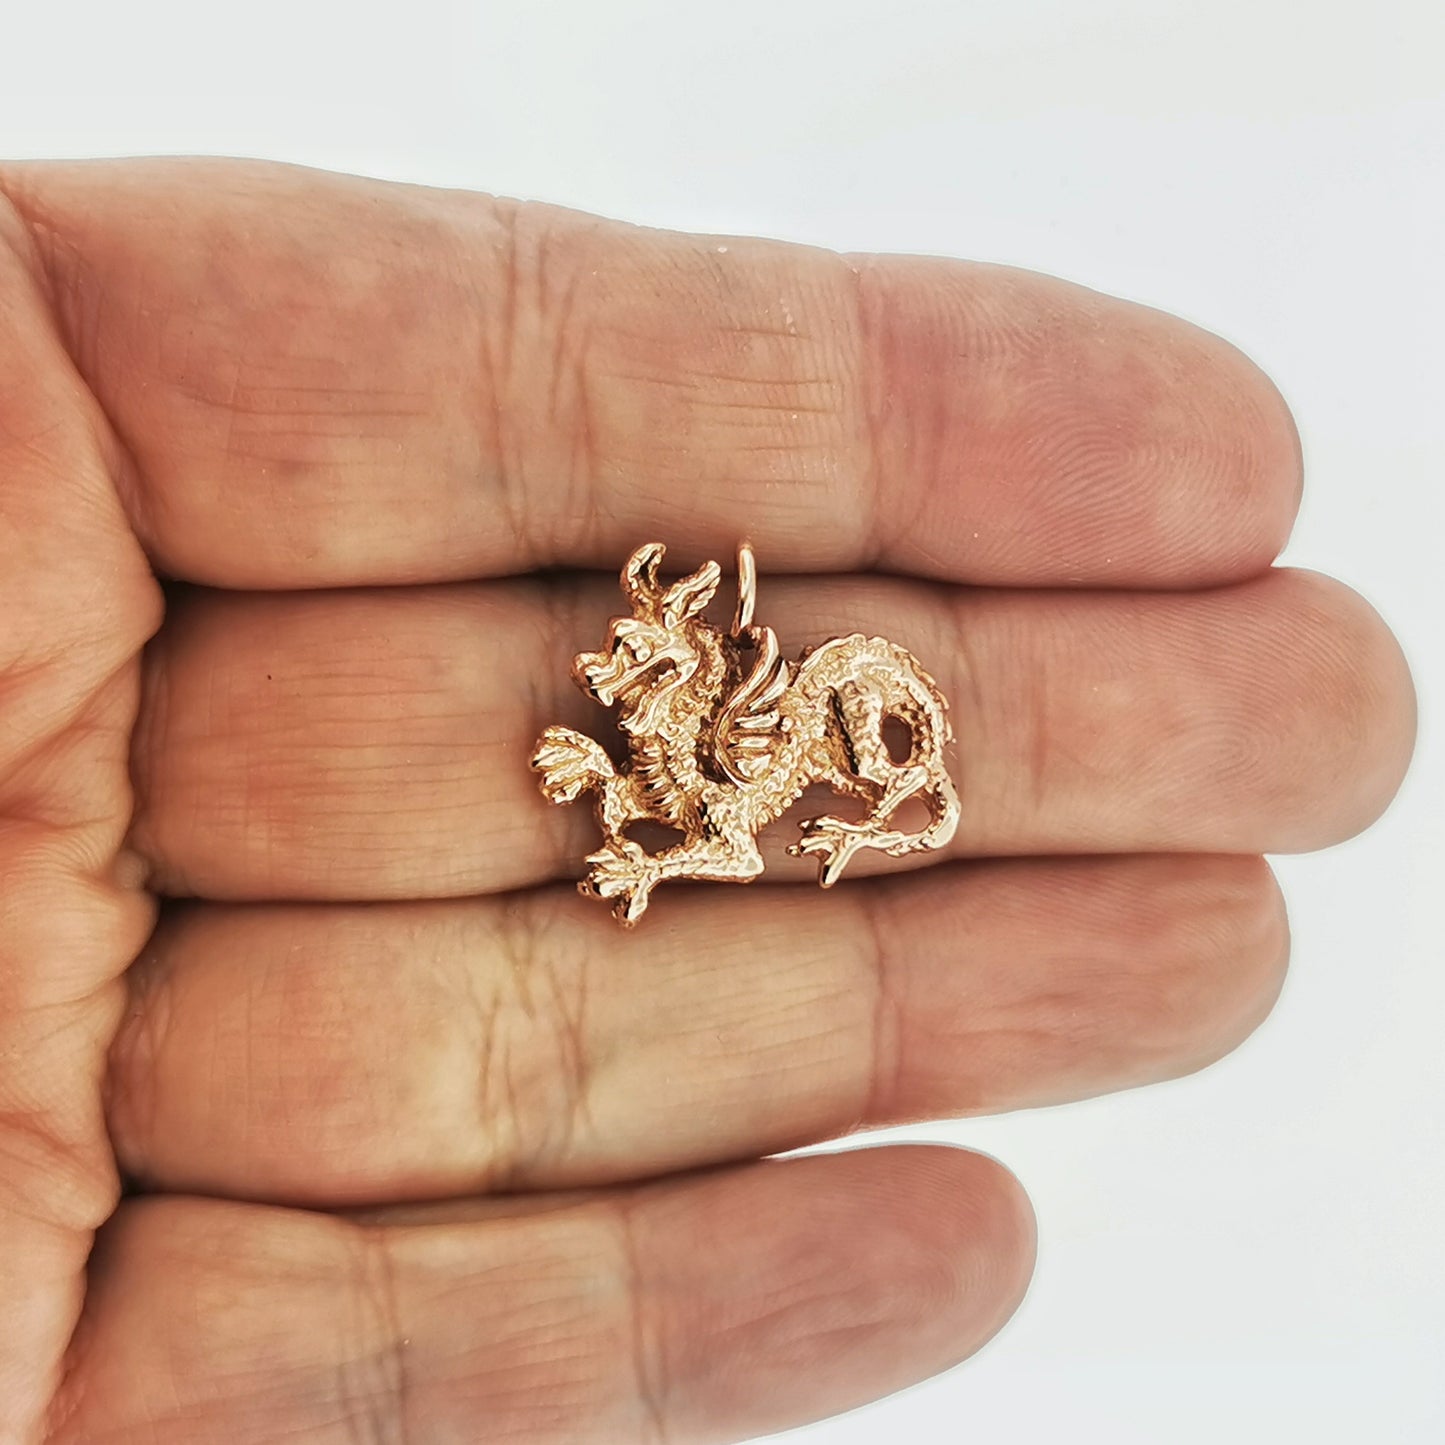 Medieval Dragon Charm in Sterling Silver or Antique Bronze